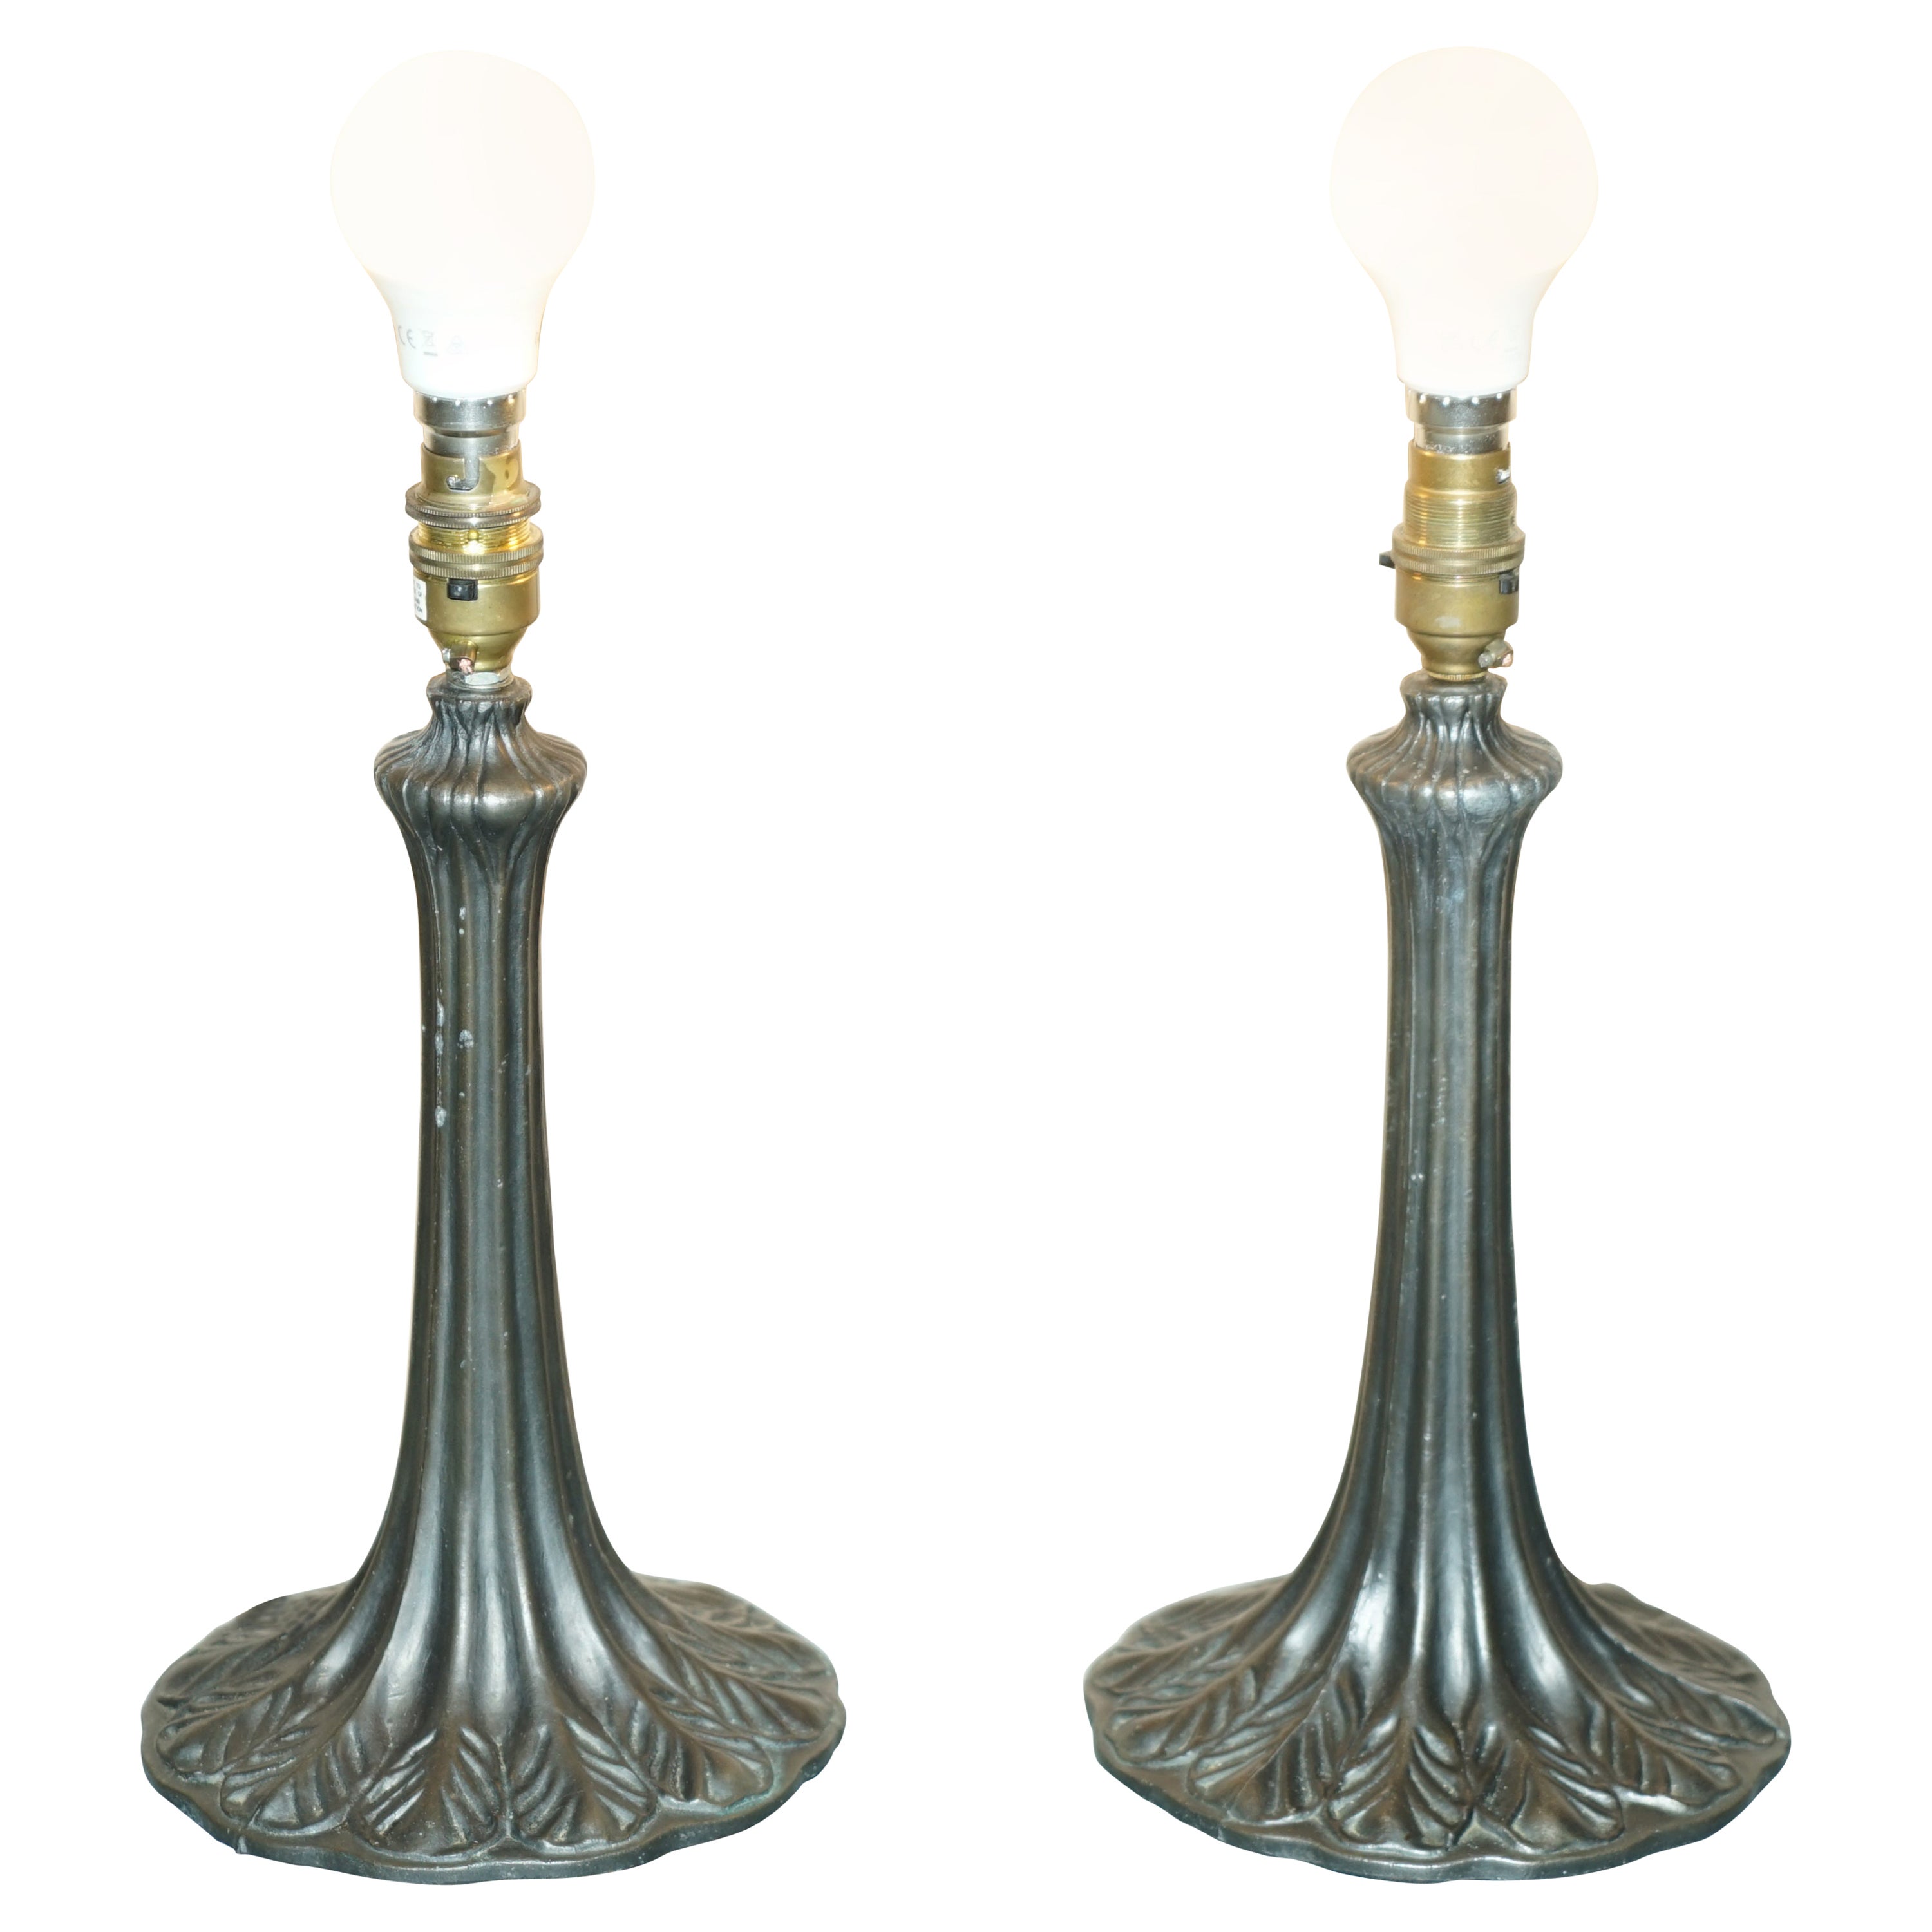 Pair of Vintage Bronzed Tiffany & Co Style Table Lamps with Lily Pad Bases For Sale